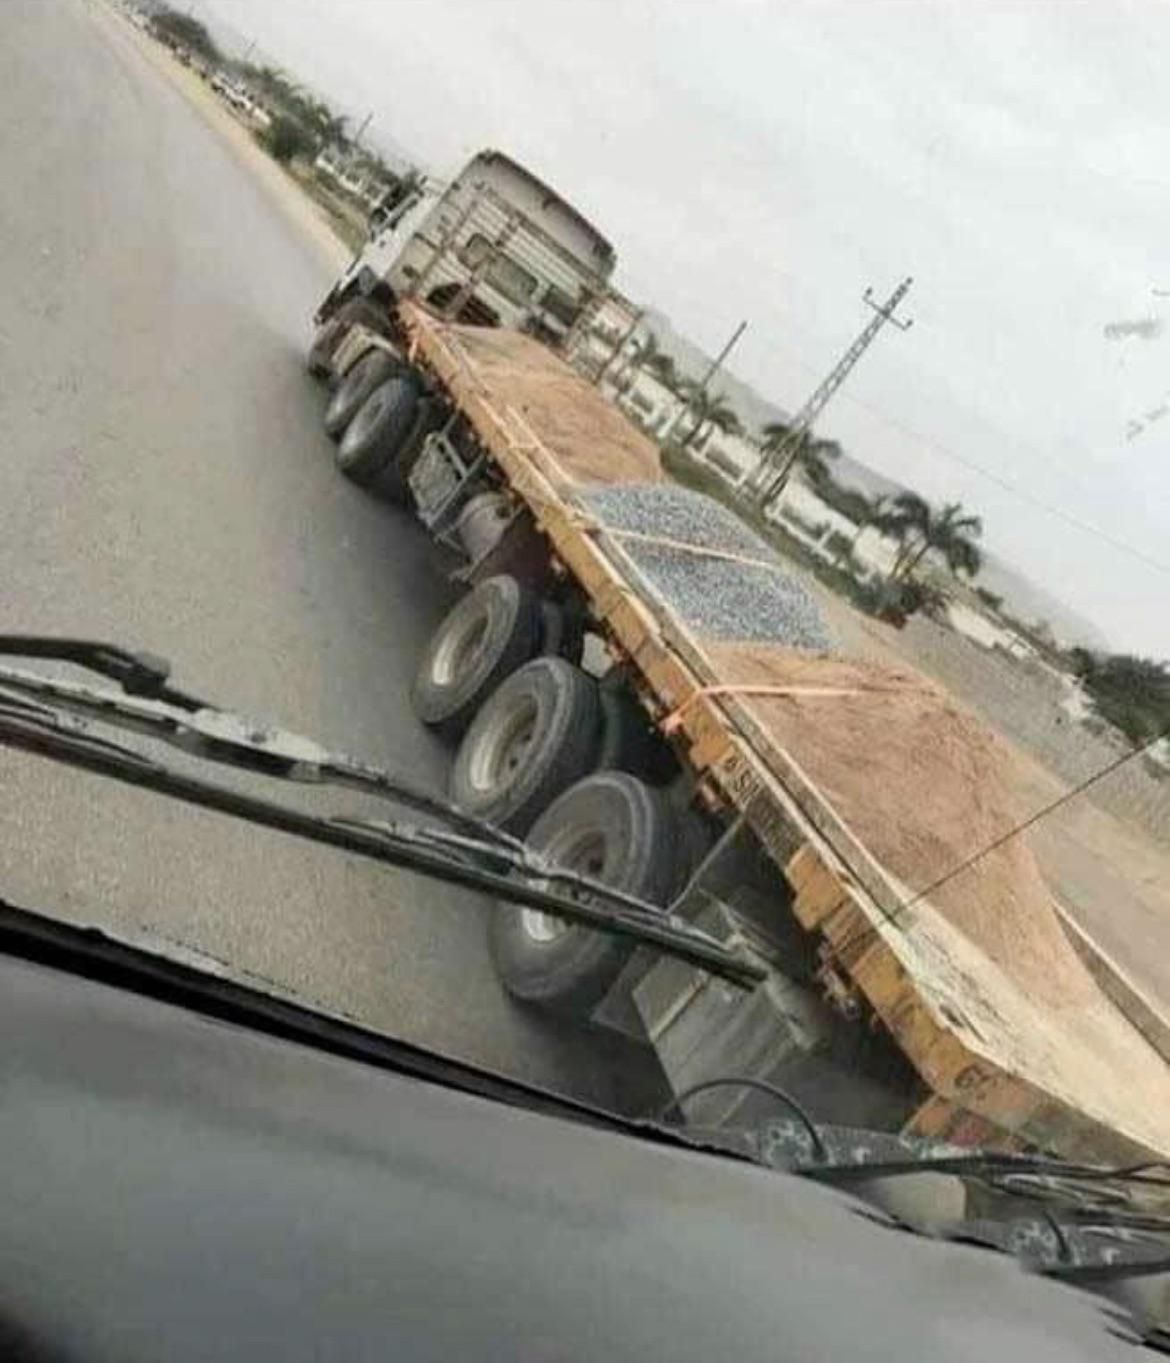 Good thing he secured his cargo!